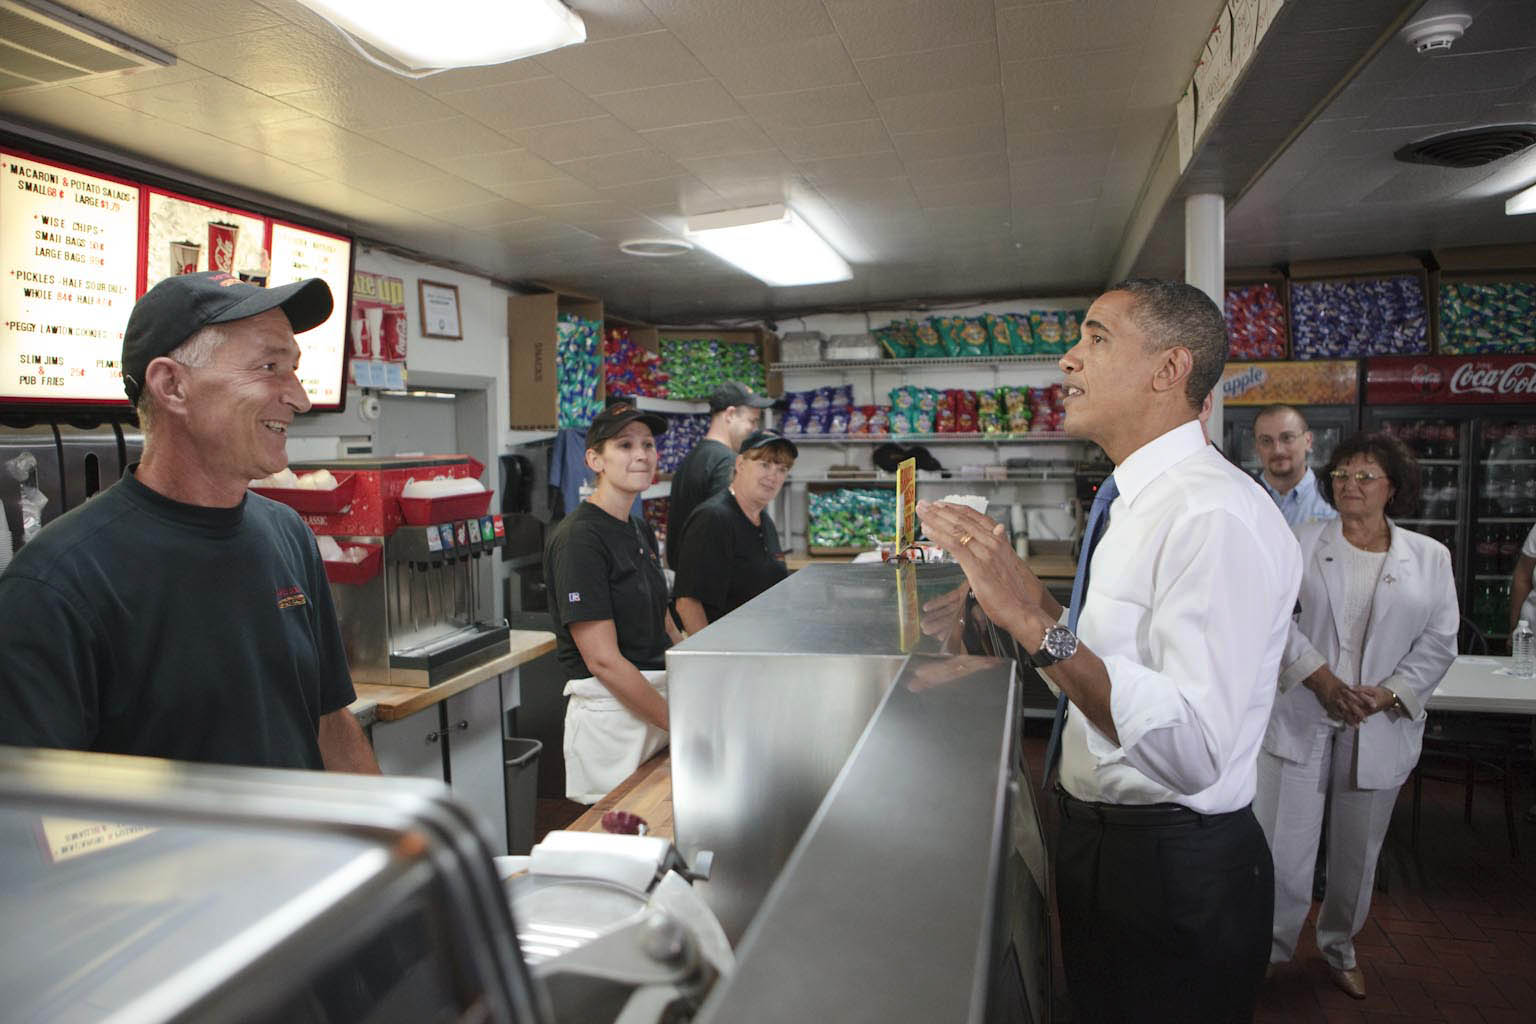 President Obama Orders Lunch at Tastee Sub Shop 